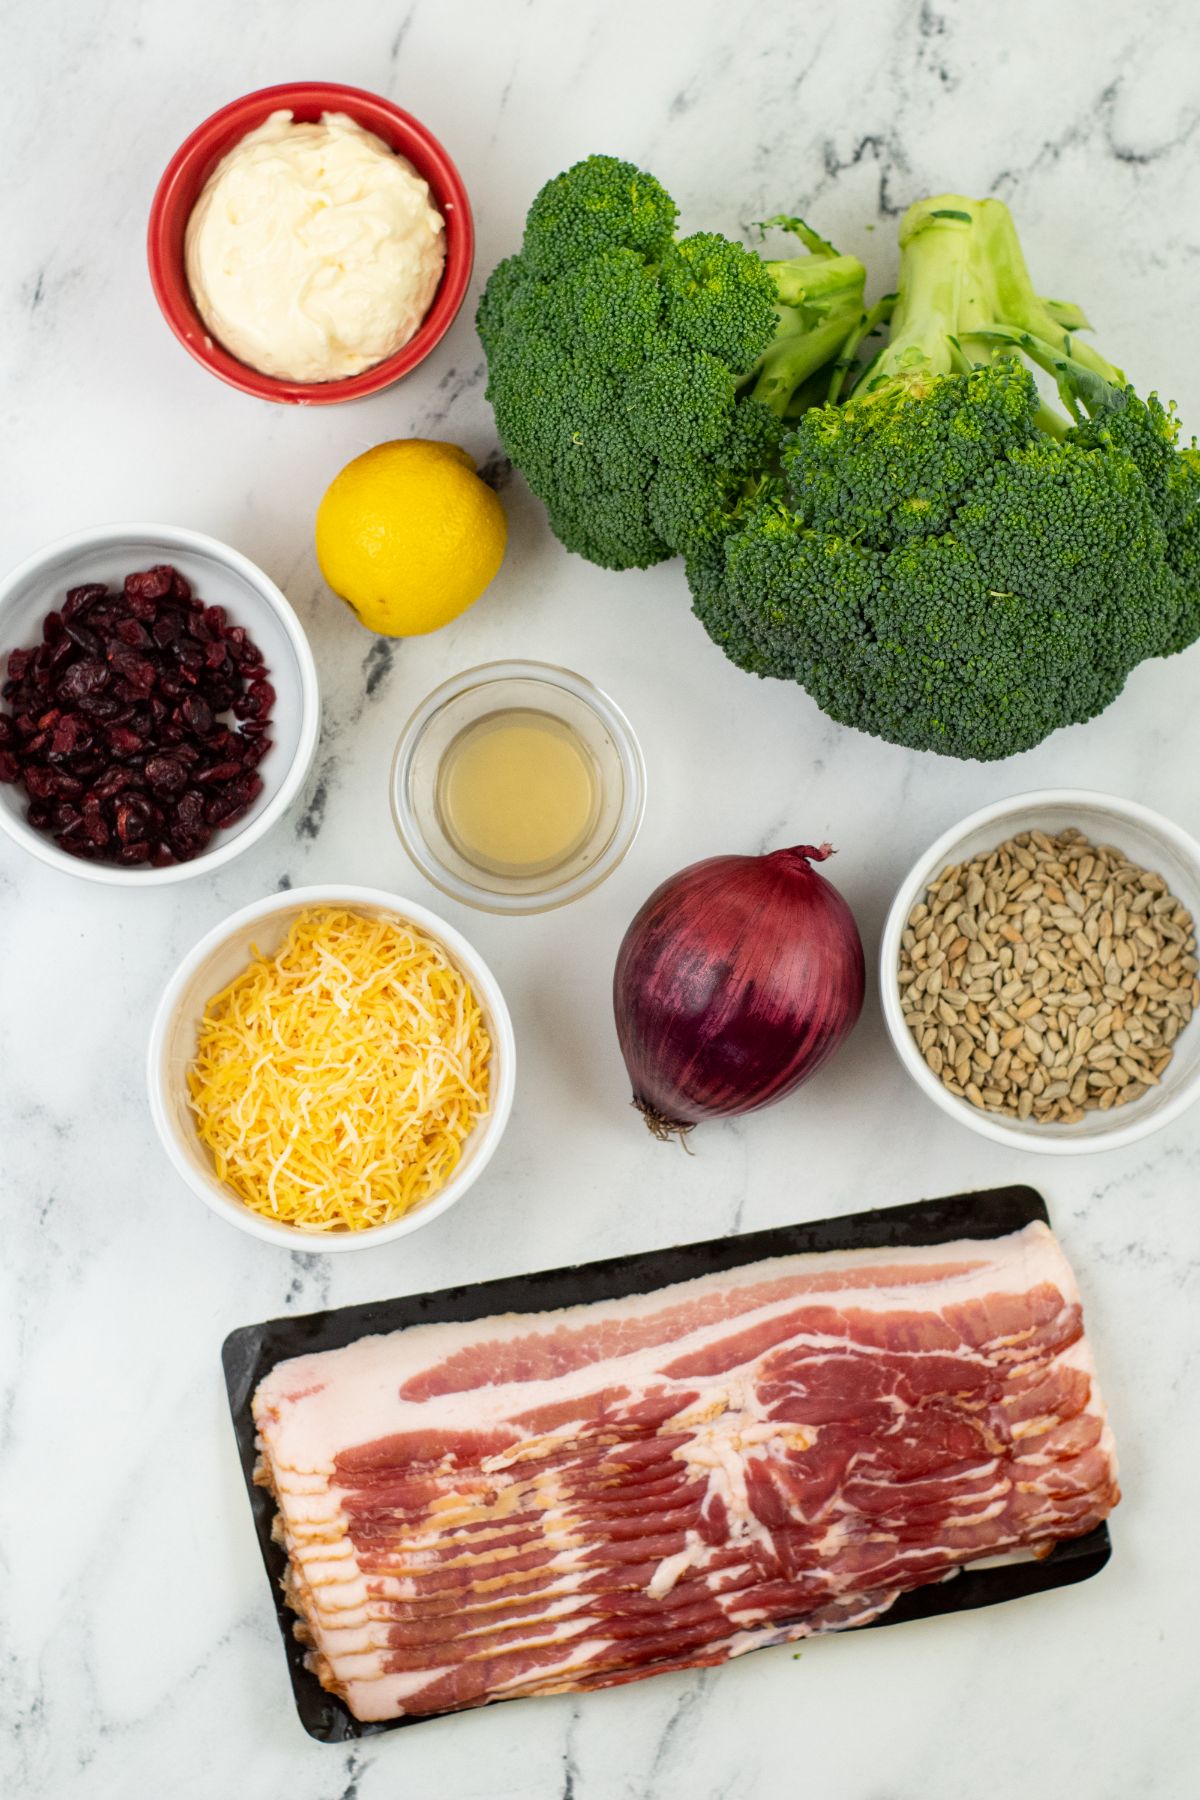 Ingredients used to make Broccoli Bacon and Cheese Salad.